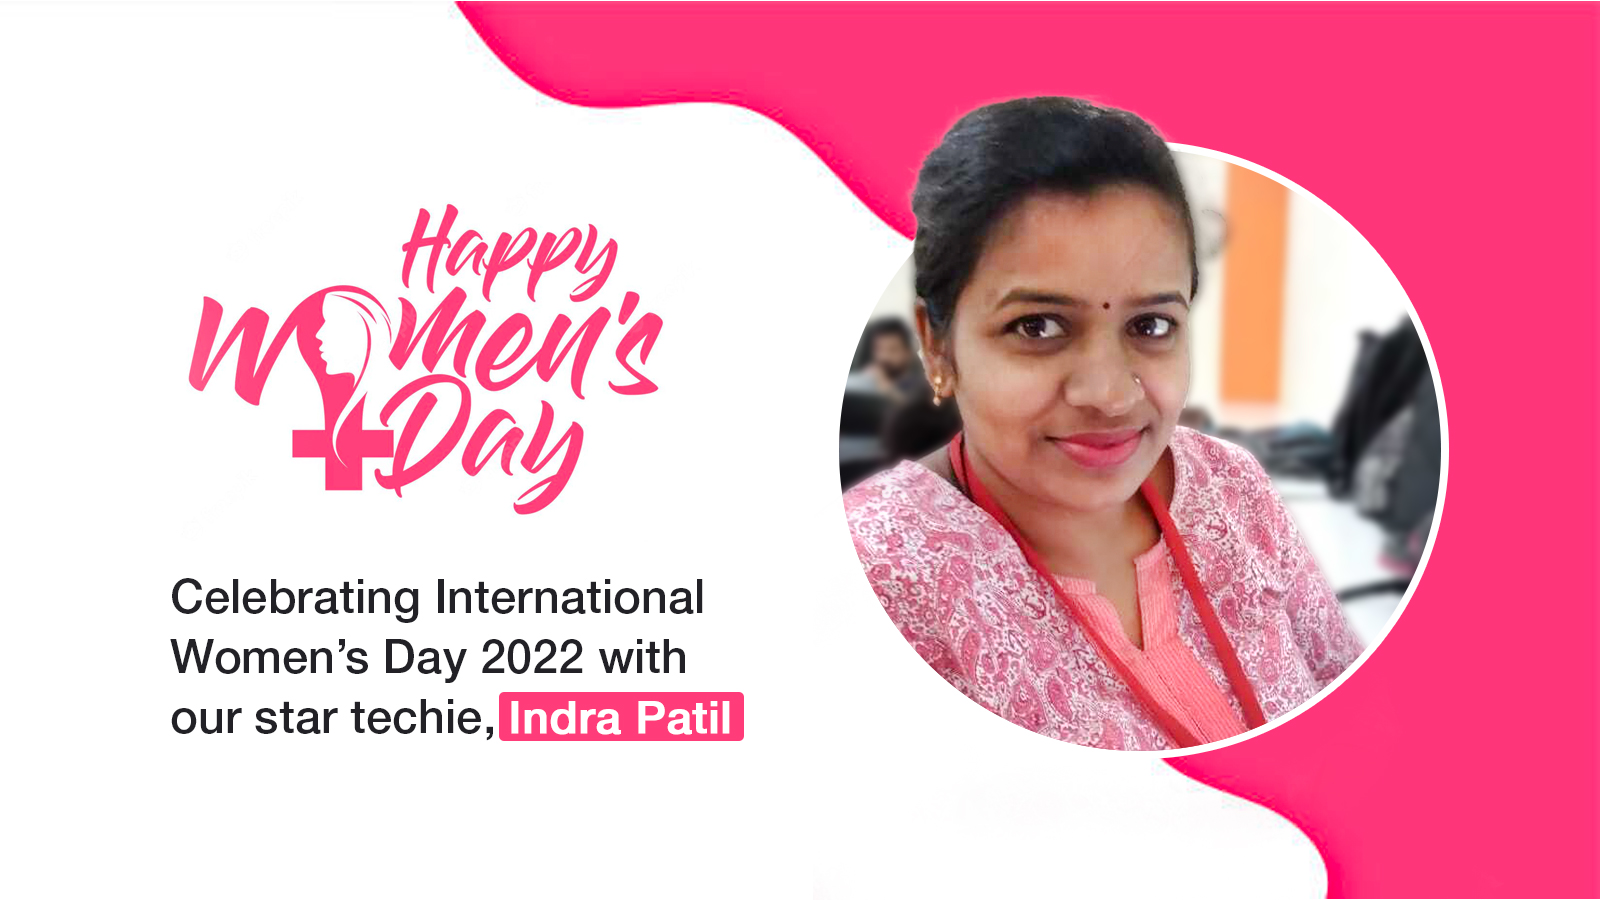 Indra Patil speaks about work and life in this interview on International Women's Day